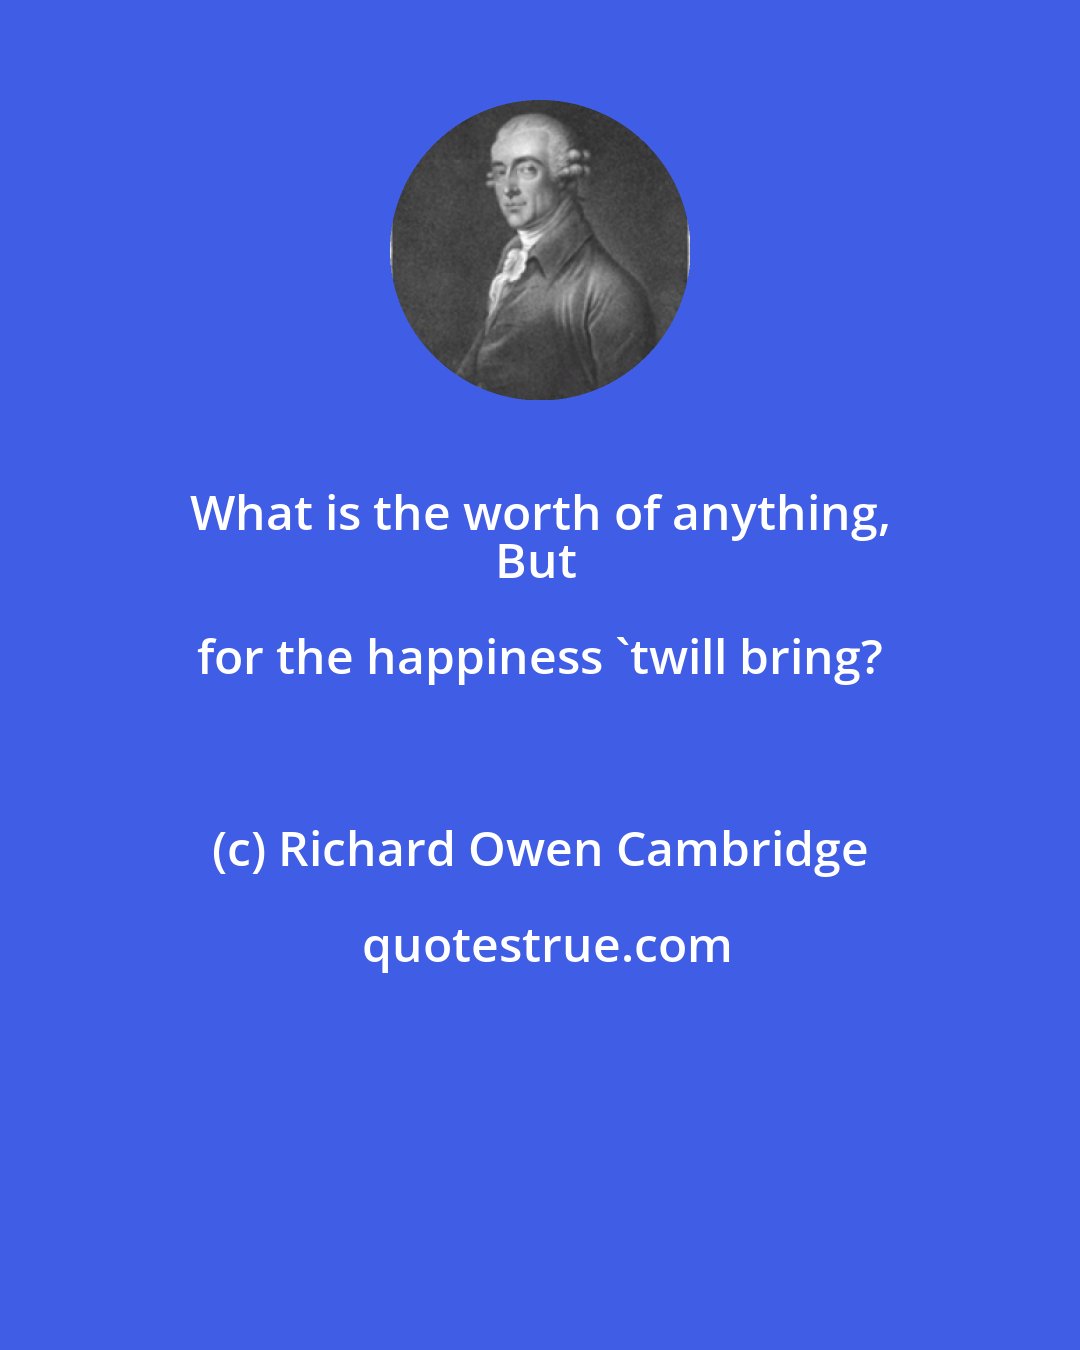 Richard Owen Cambridge: What is the worth of anything, 
But for the happiness 'twill bring?